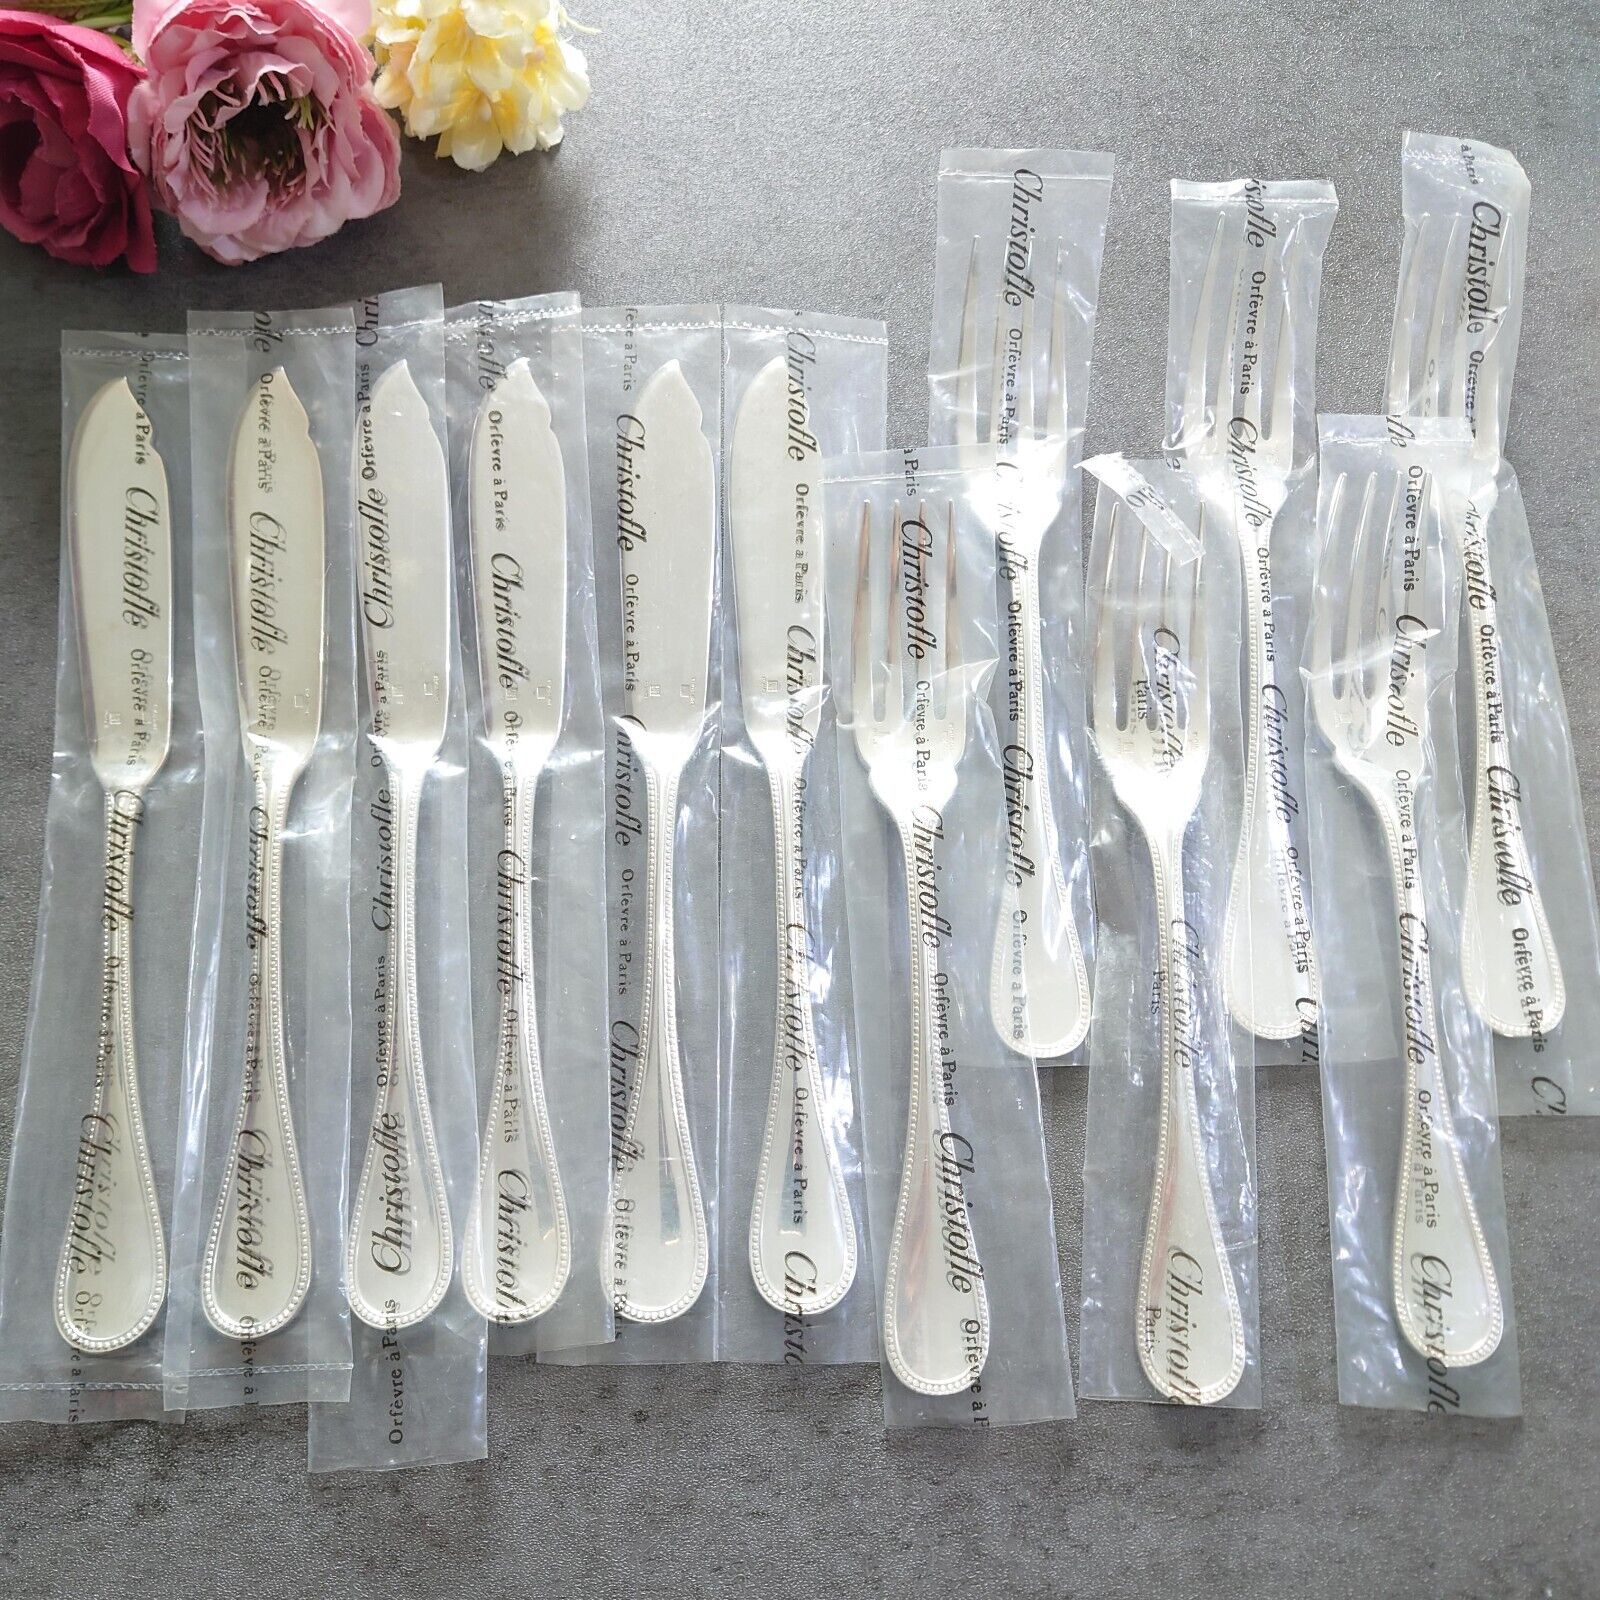 Christofle Perles 12pcs Silverplate Flatware Fish Knife Fish Fork Excellent